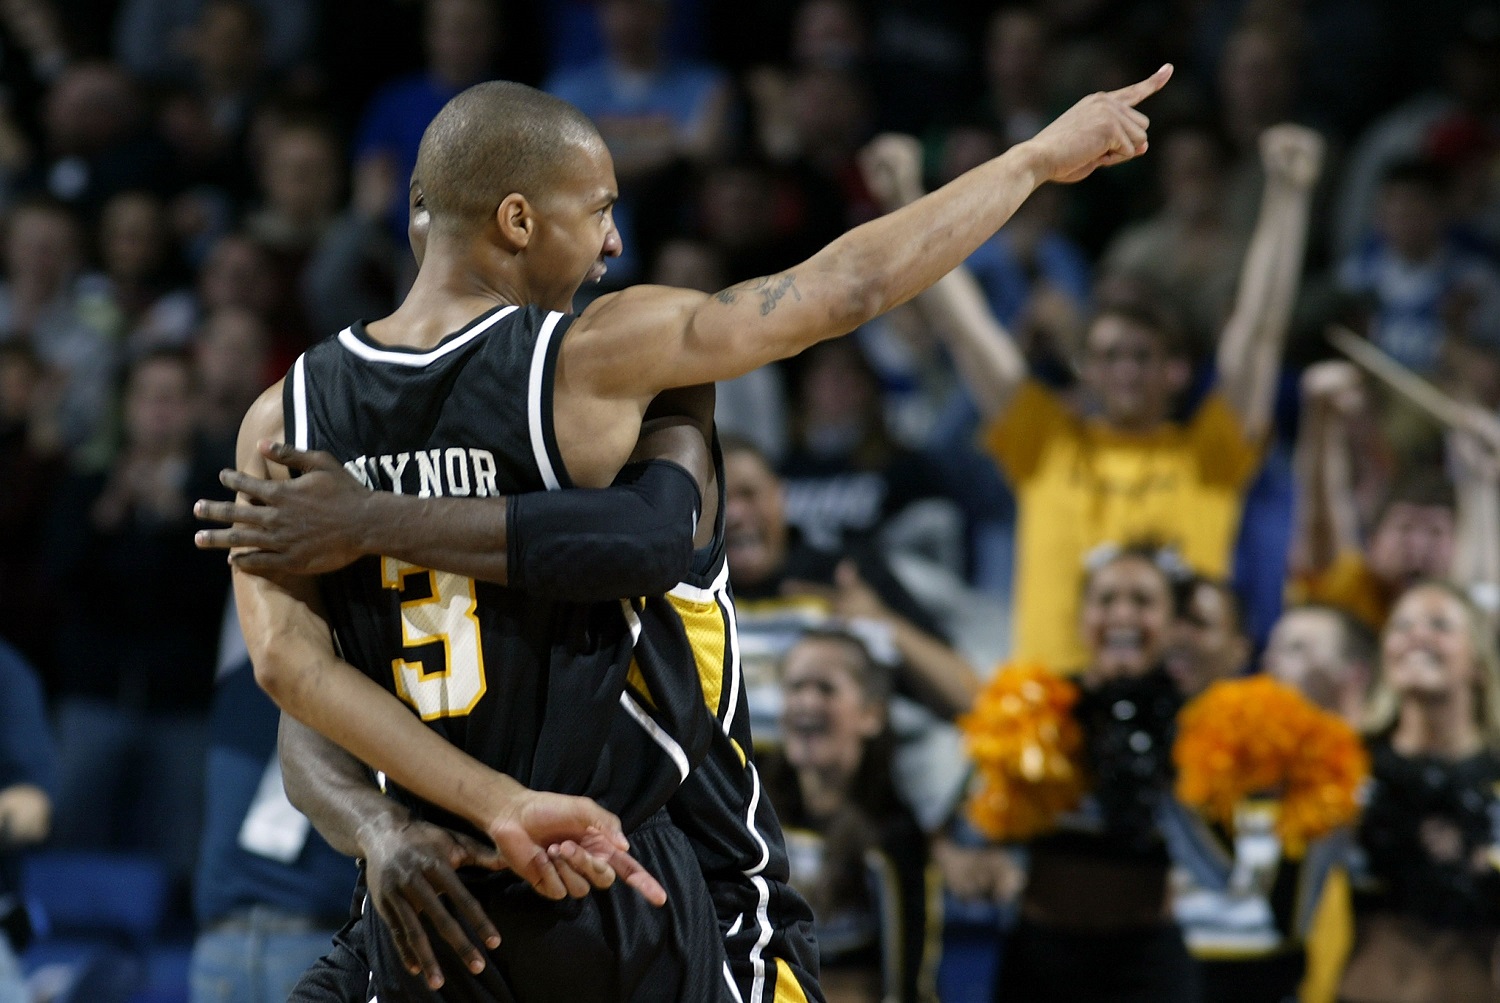 BUFFALO, NY - MARCH 15:  Eric Maynor #3 of the Virginia Commonwealth Rams celebrates with teammate Franck Ndongo #21 after beating the Duke Blue Devils during round one of the NCAA Men's Basketball Tournament at the HSBC Arena on March 15, 2007  in Buffalo, New York.  (Photo by Rick Stewart/Getty Images)